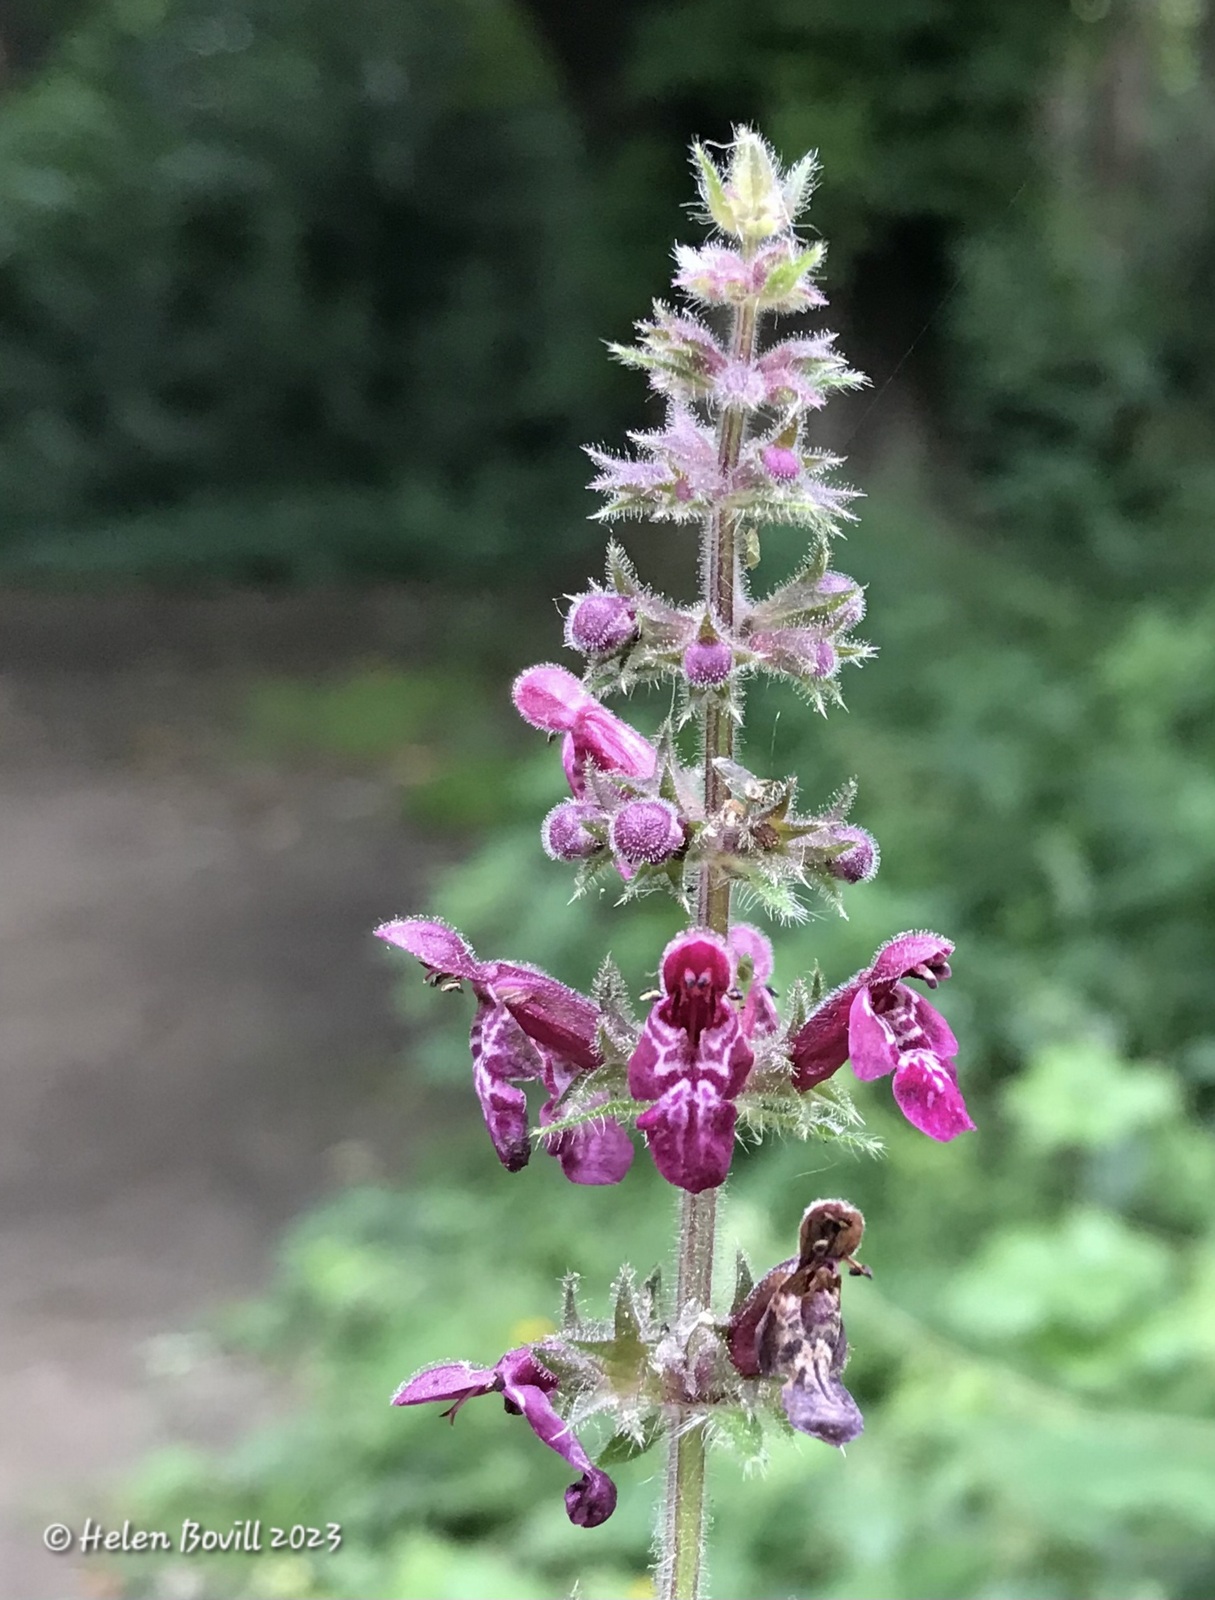 The tall pink flower stems of Hedge Woundwort